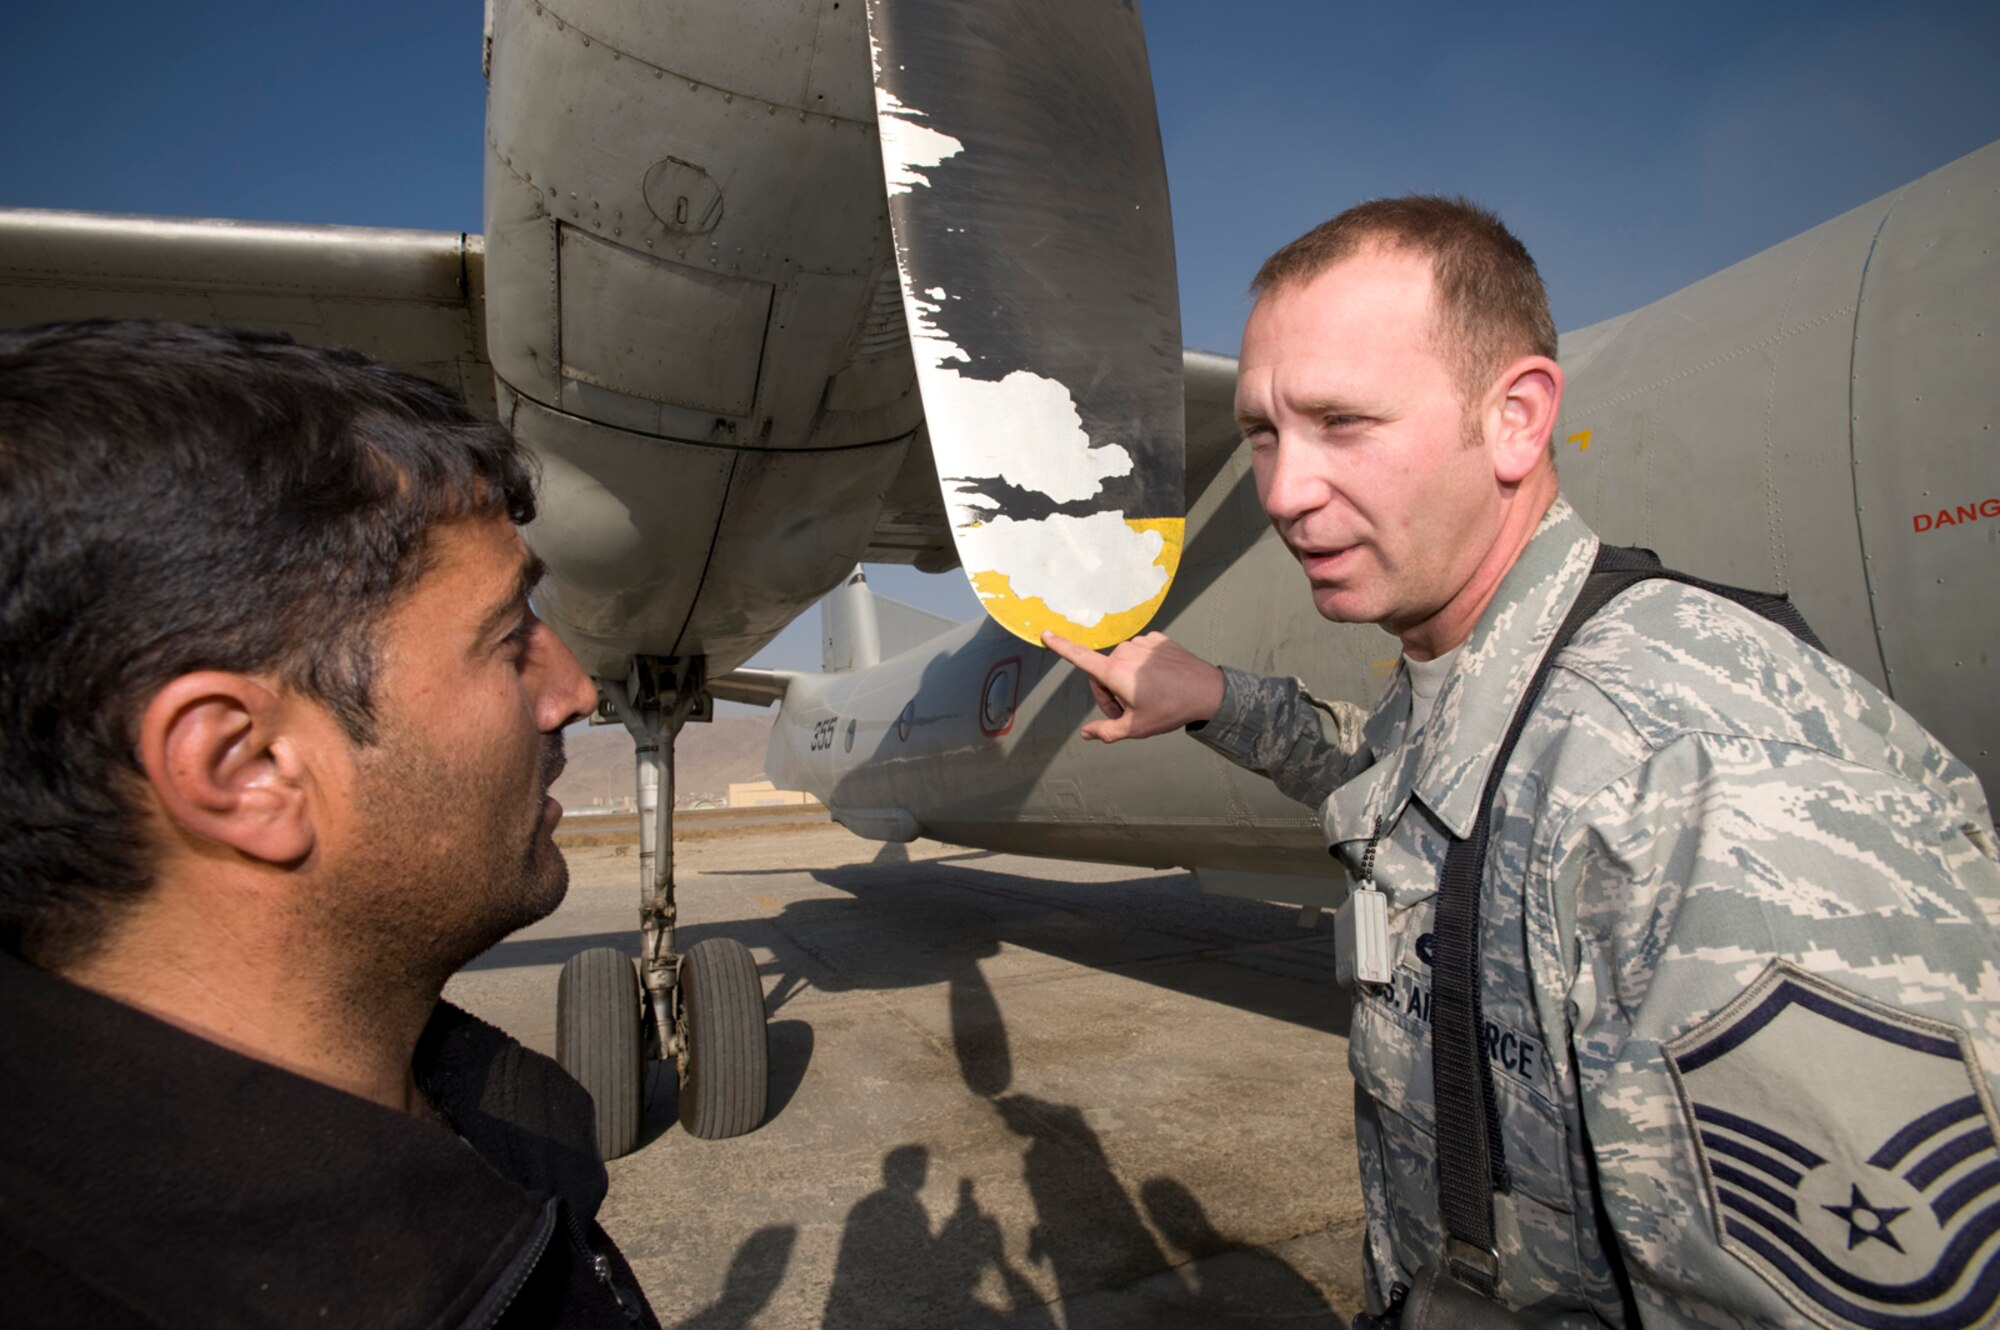 KABUL, Afghanistan -- Master Sgt Chris Lipphardt gets a lesson in Dari, one of the two main languages used in Afghanistan. Learning how to say 'yellow' as in the color of the end of this propeller, in the local language has been a tremendous asset in mentoring the ANAAC on flying operations. Sergeant Lipphardt is the fixed-wing maintenance mentor and superintendent. (U.S. Air Force photo/Master Sgt. Keith Brown)